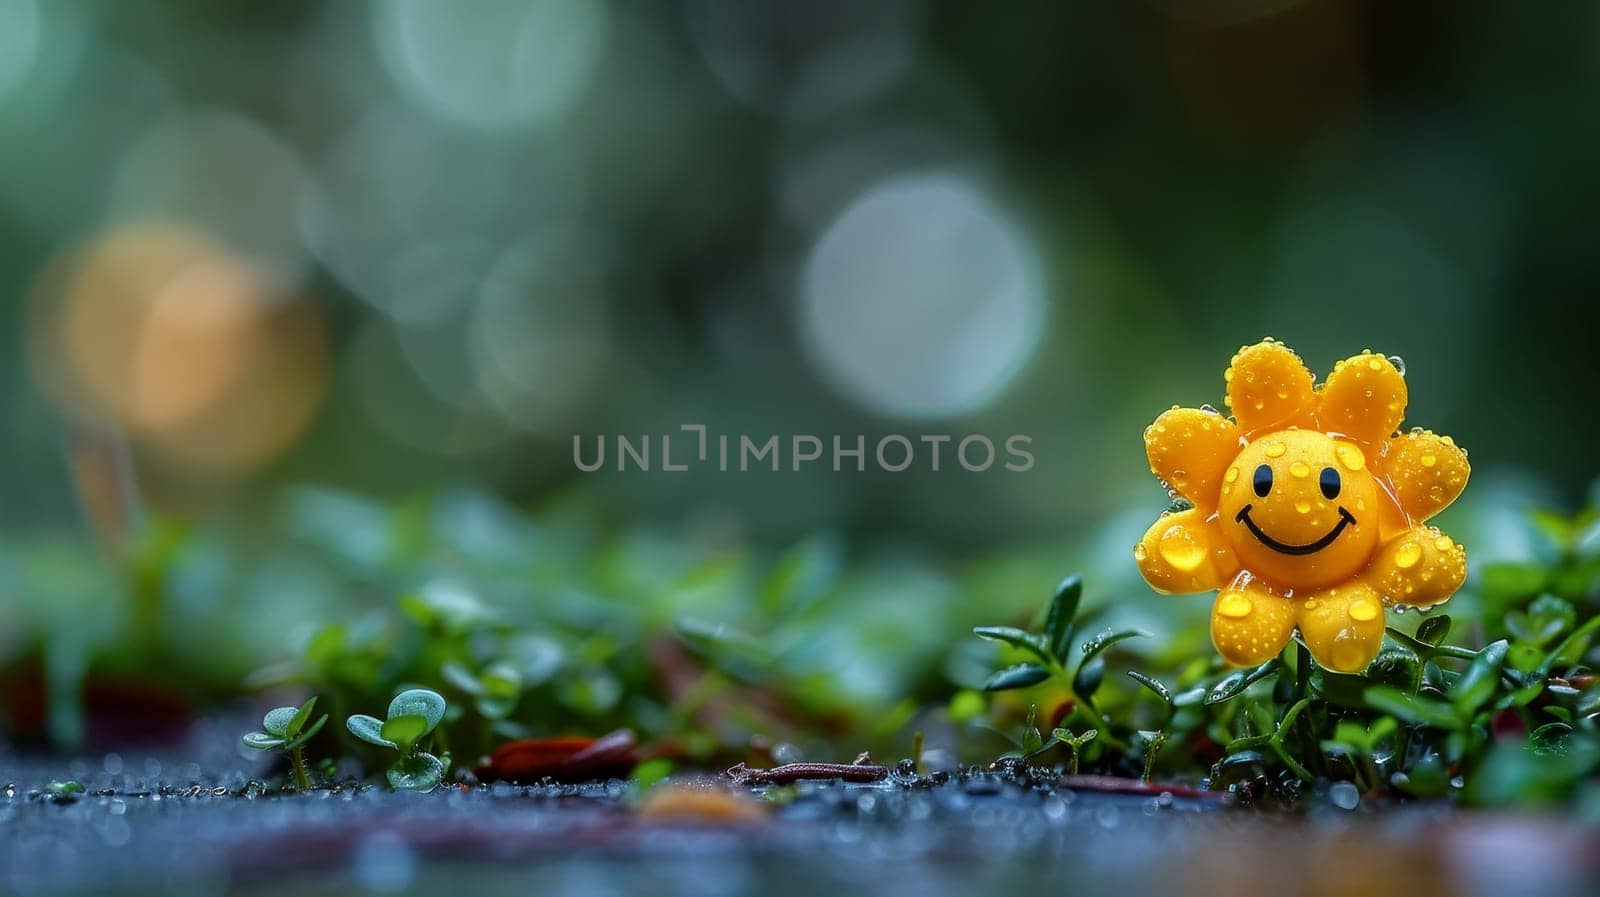 Smiling Yellow Flower with Dew on Green Foliage